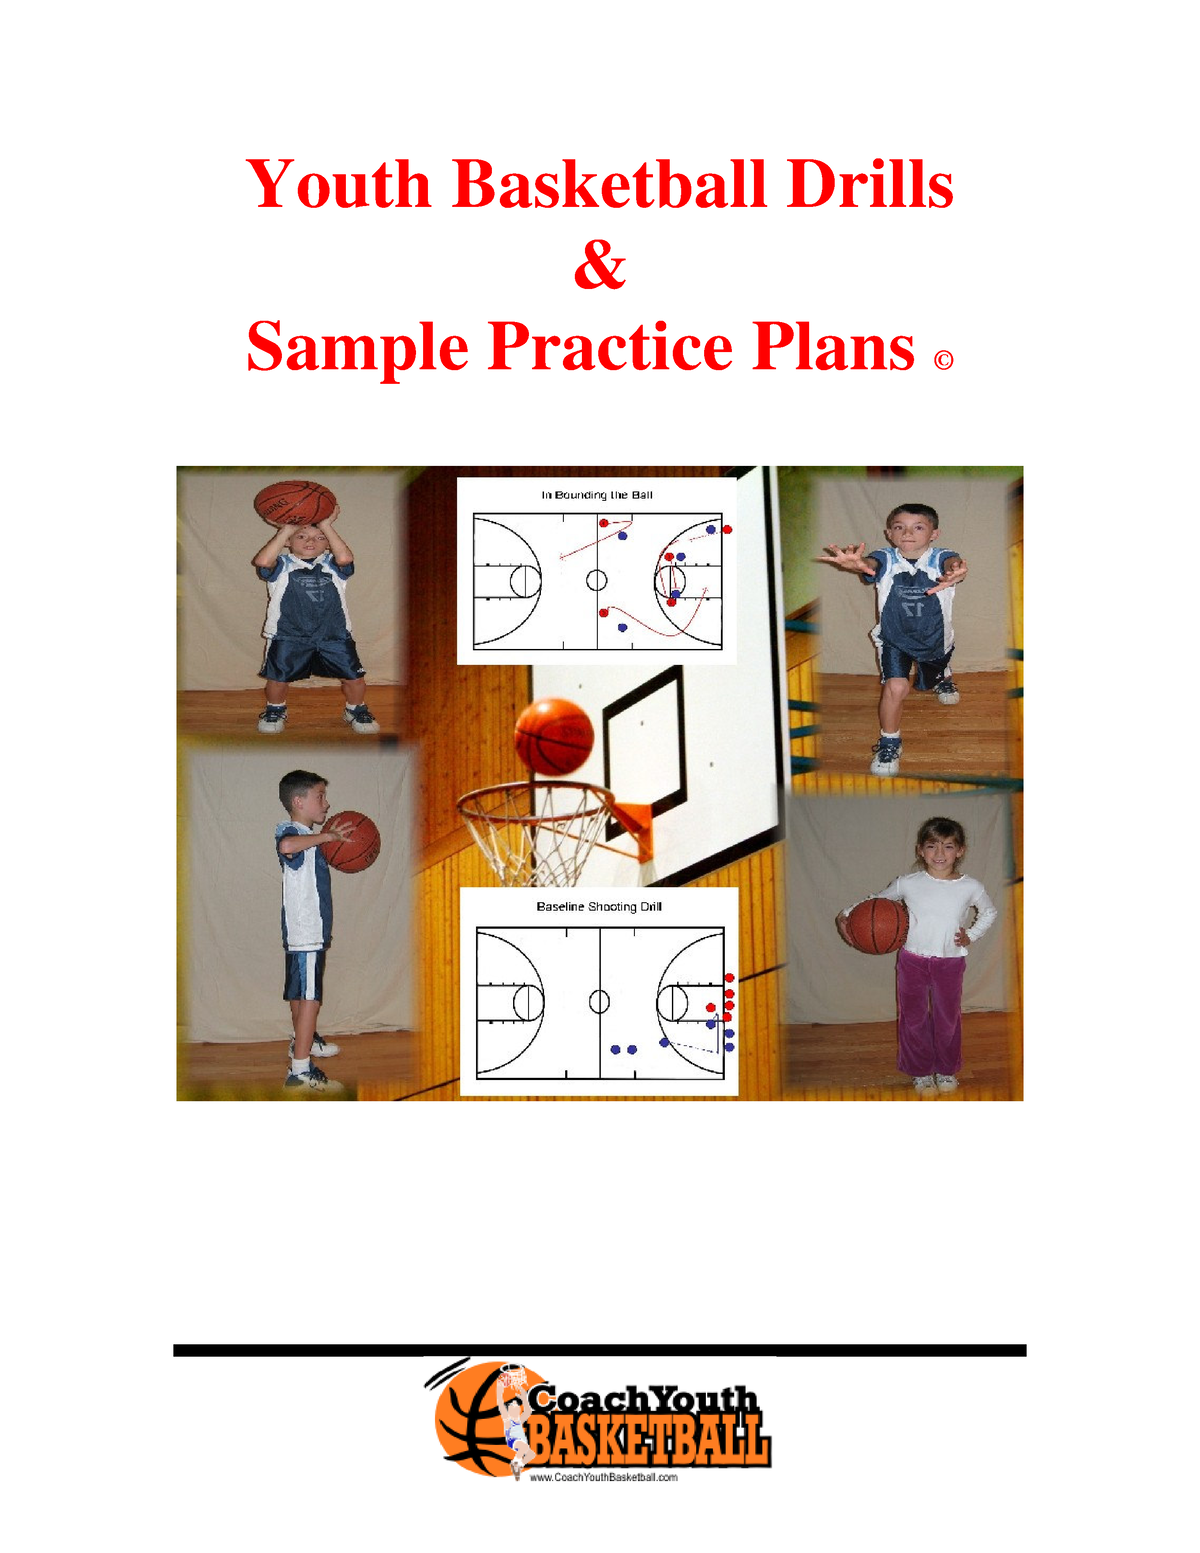 Youth Basketball Drills and Practice Plans - Youth Basketball Drills ...